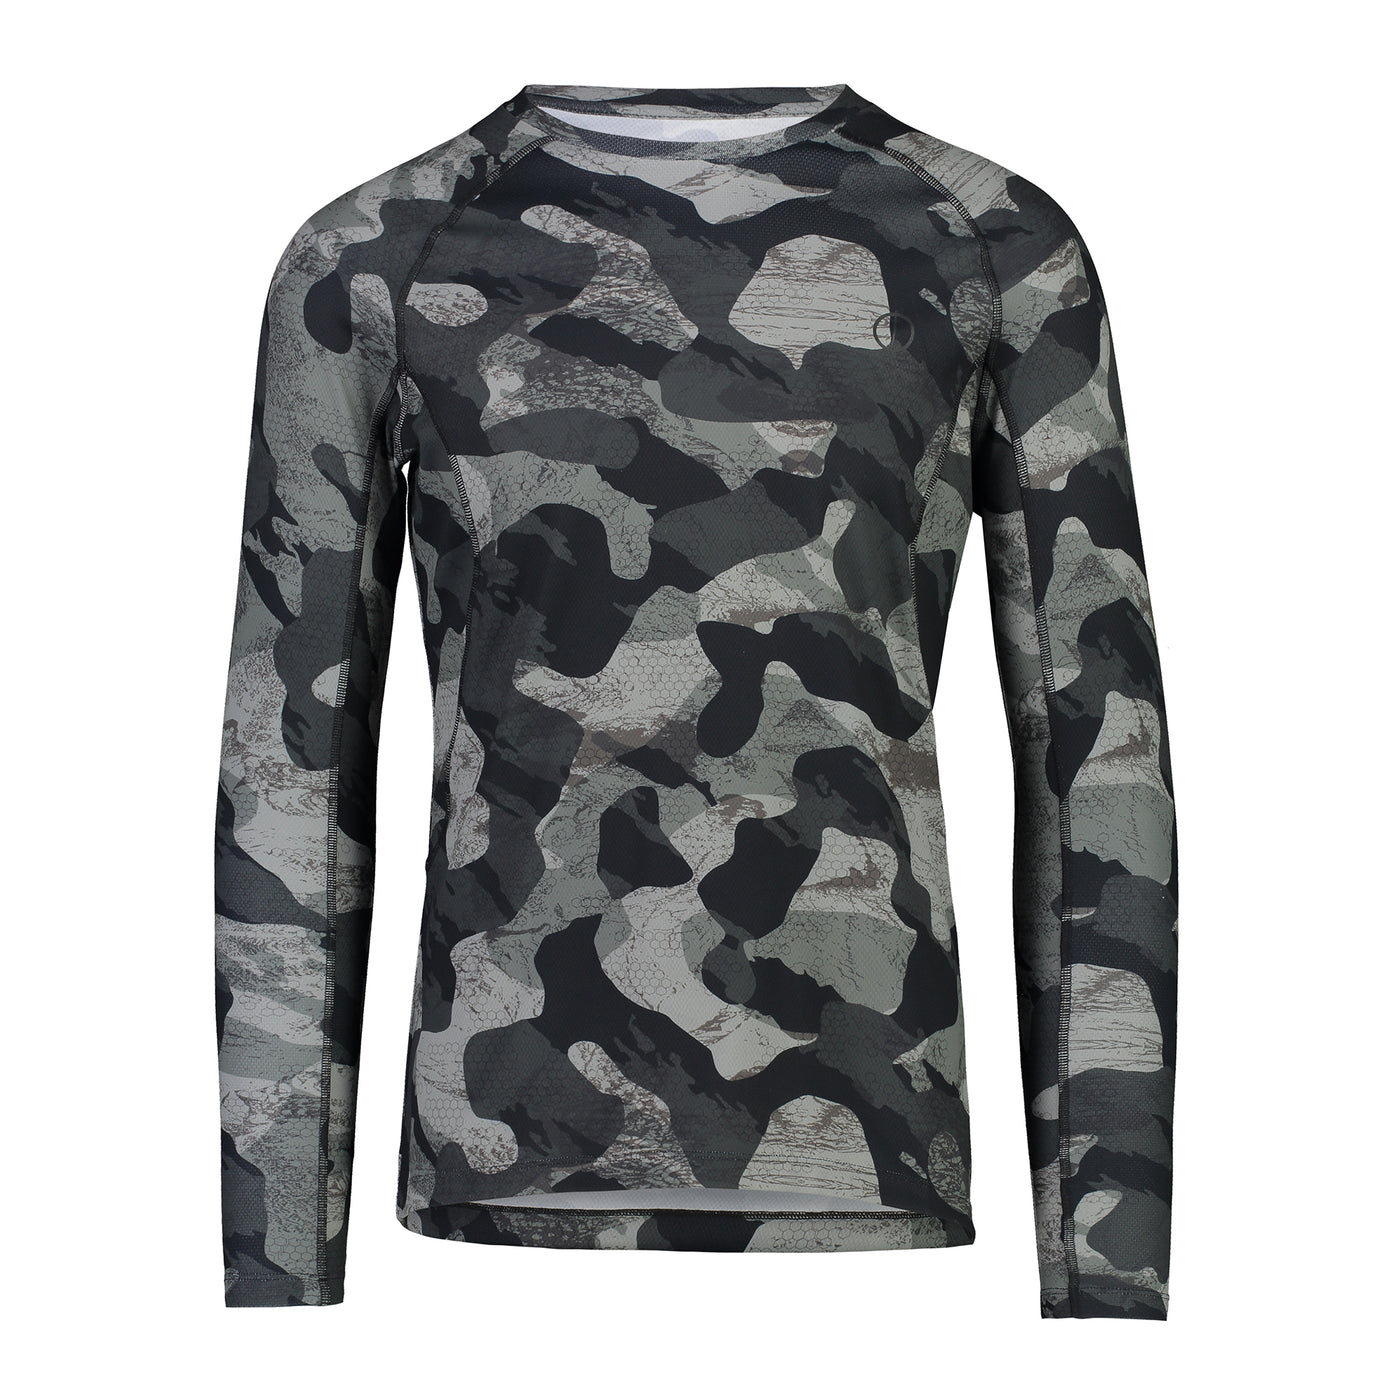 direct action long sleeve tee synthetic base layer